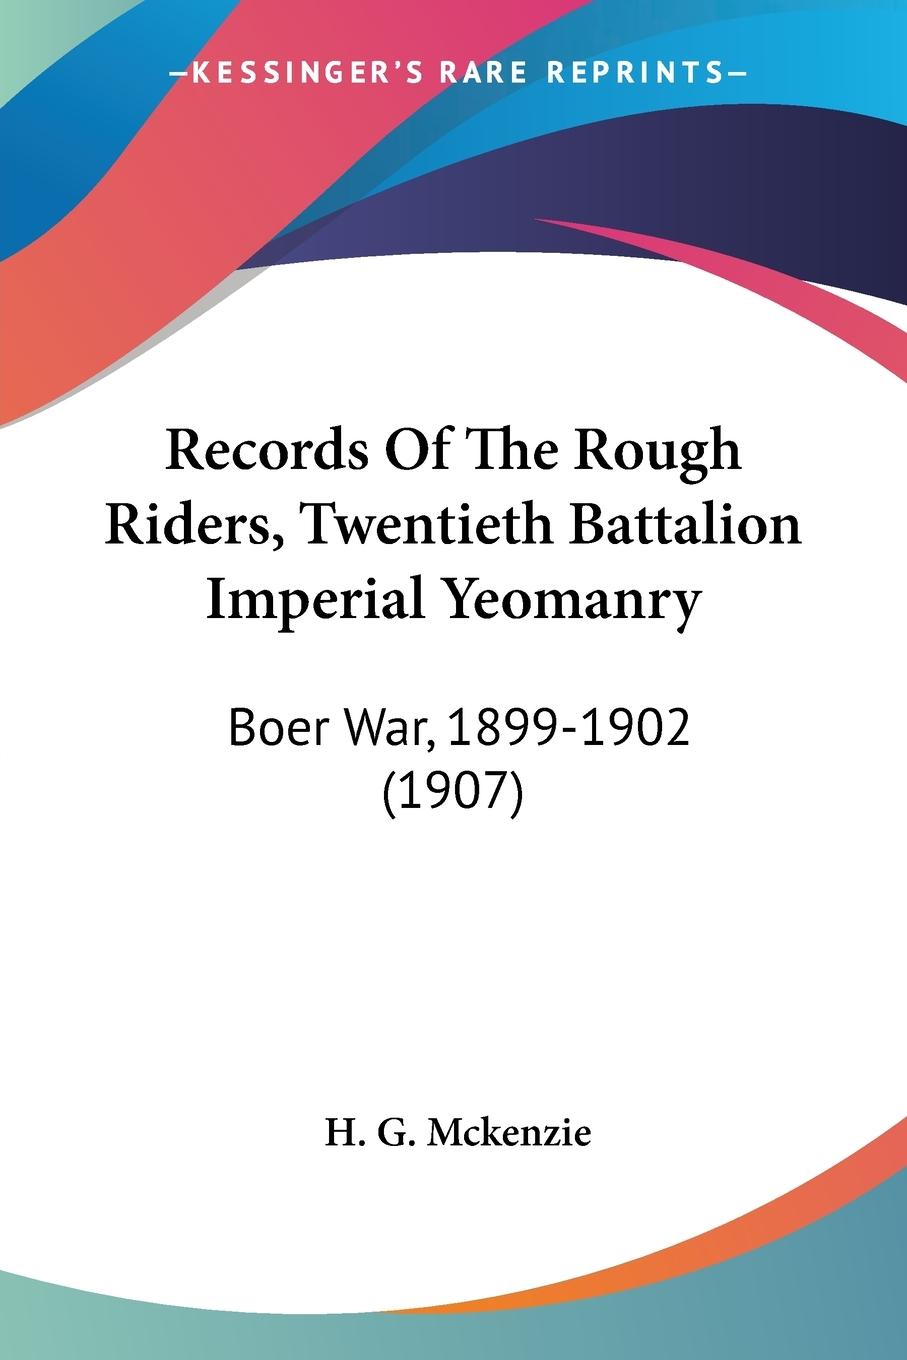 Records Of The Rough Riders, Twentieth Battalion Imperial Yeomanry - Mckenzie, H. G.